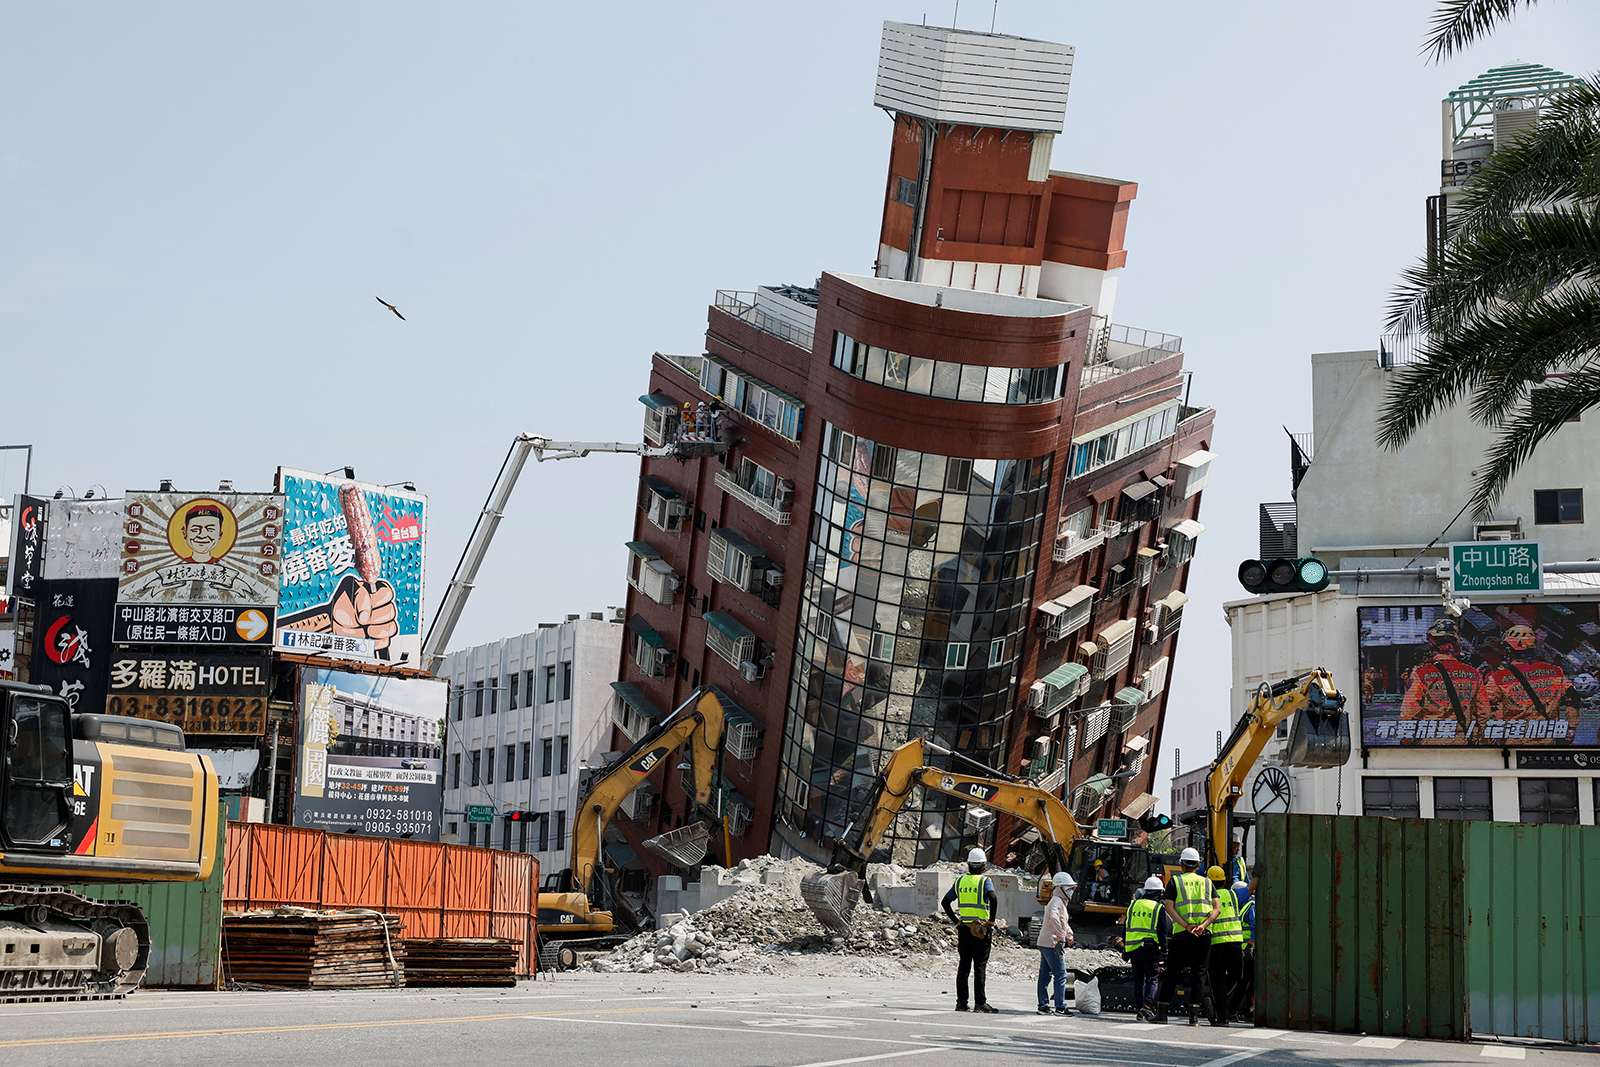 A partially collapsed building stands at a titled angle as workers carry out operations a day after a powerful earthquake struck in Hualien City, eastern Taiwan, on April 4.